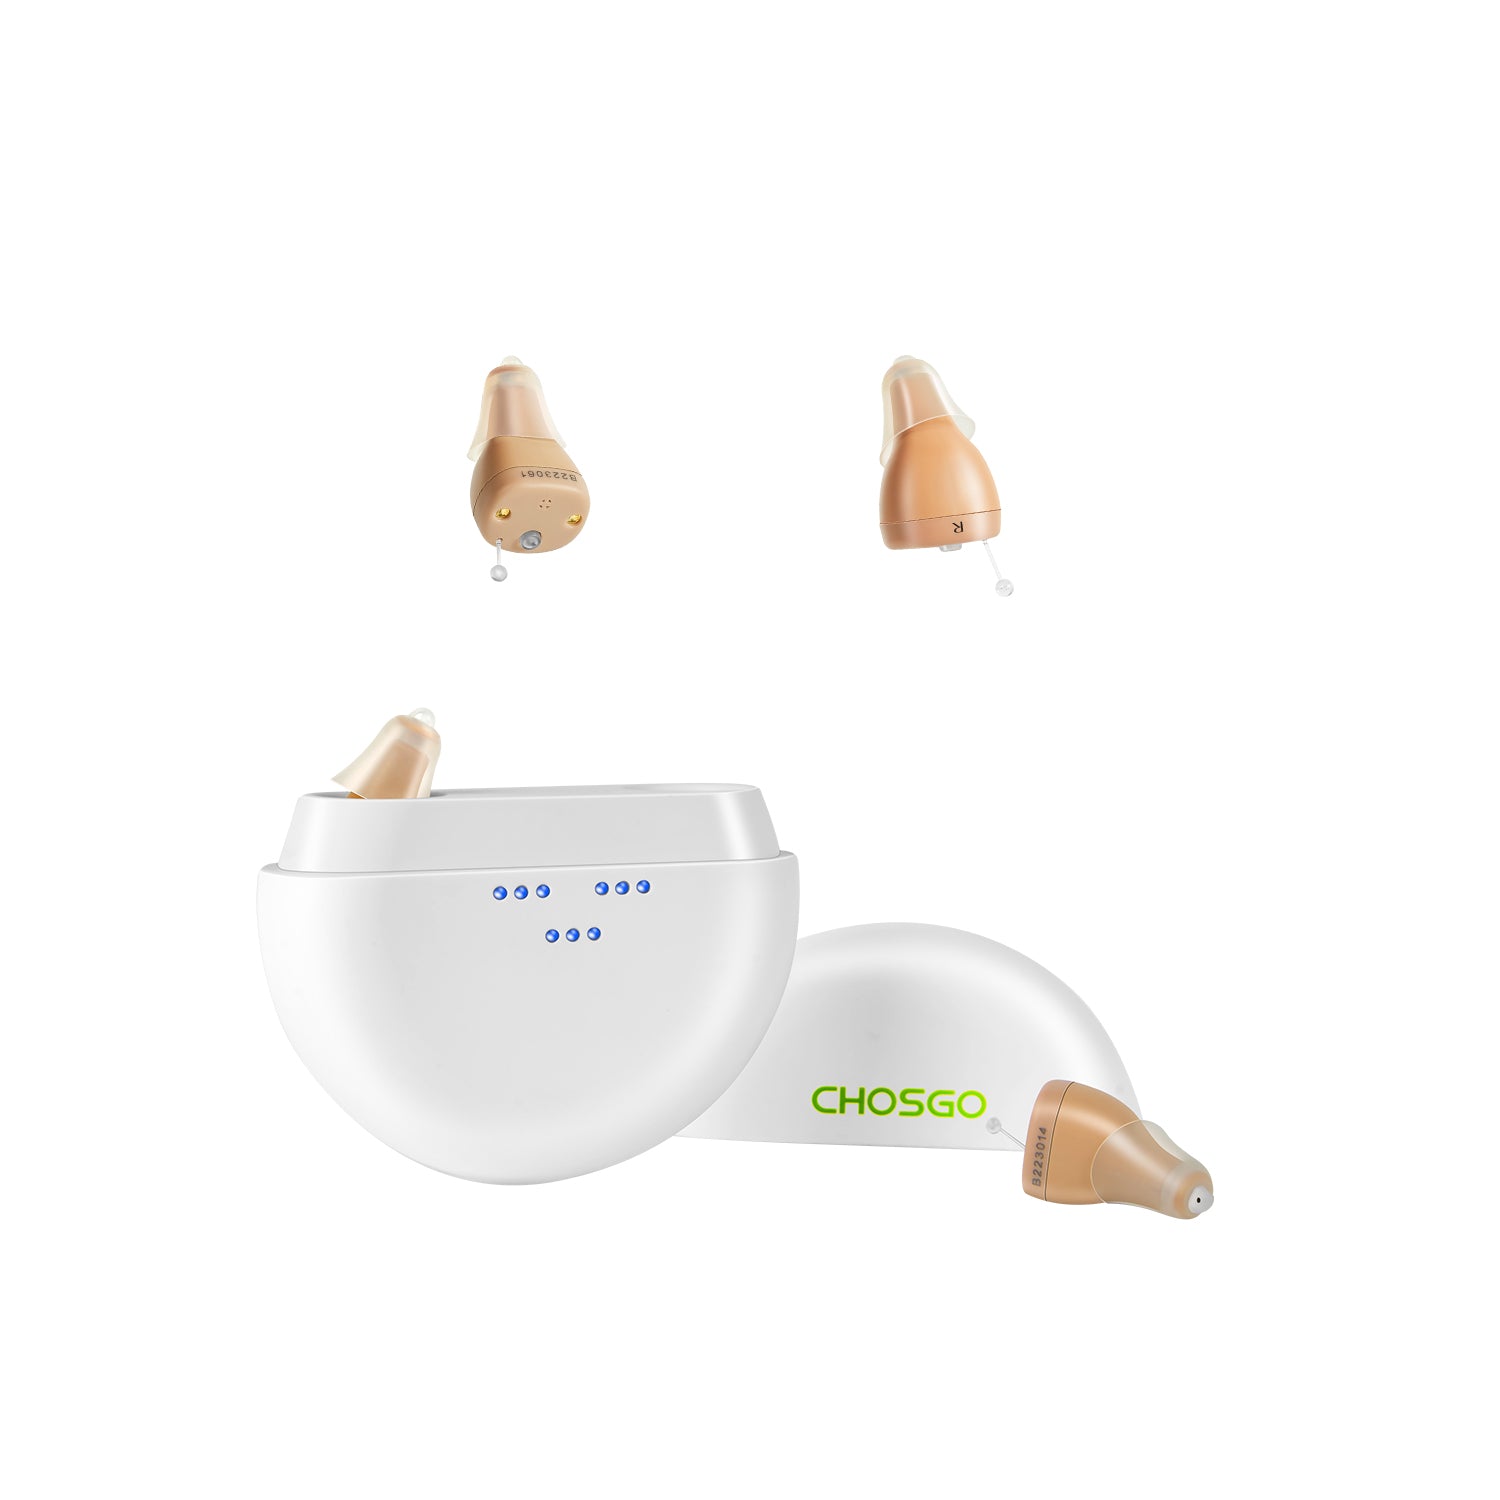 Rechargeable Hearing Aids for Seniors